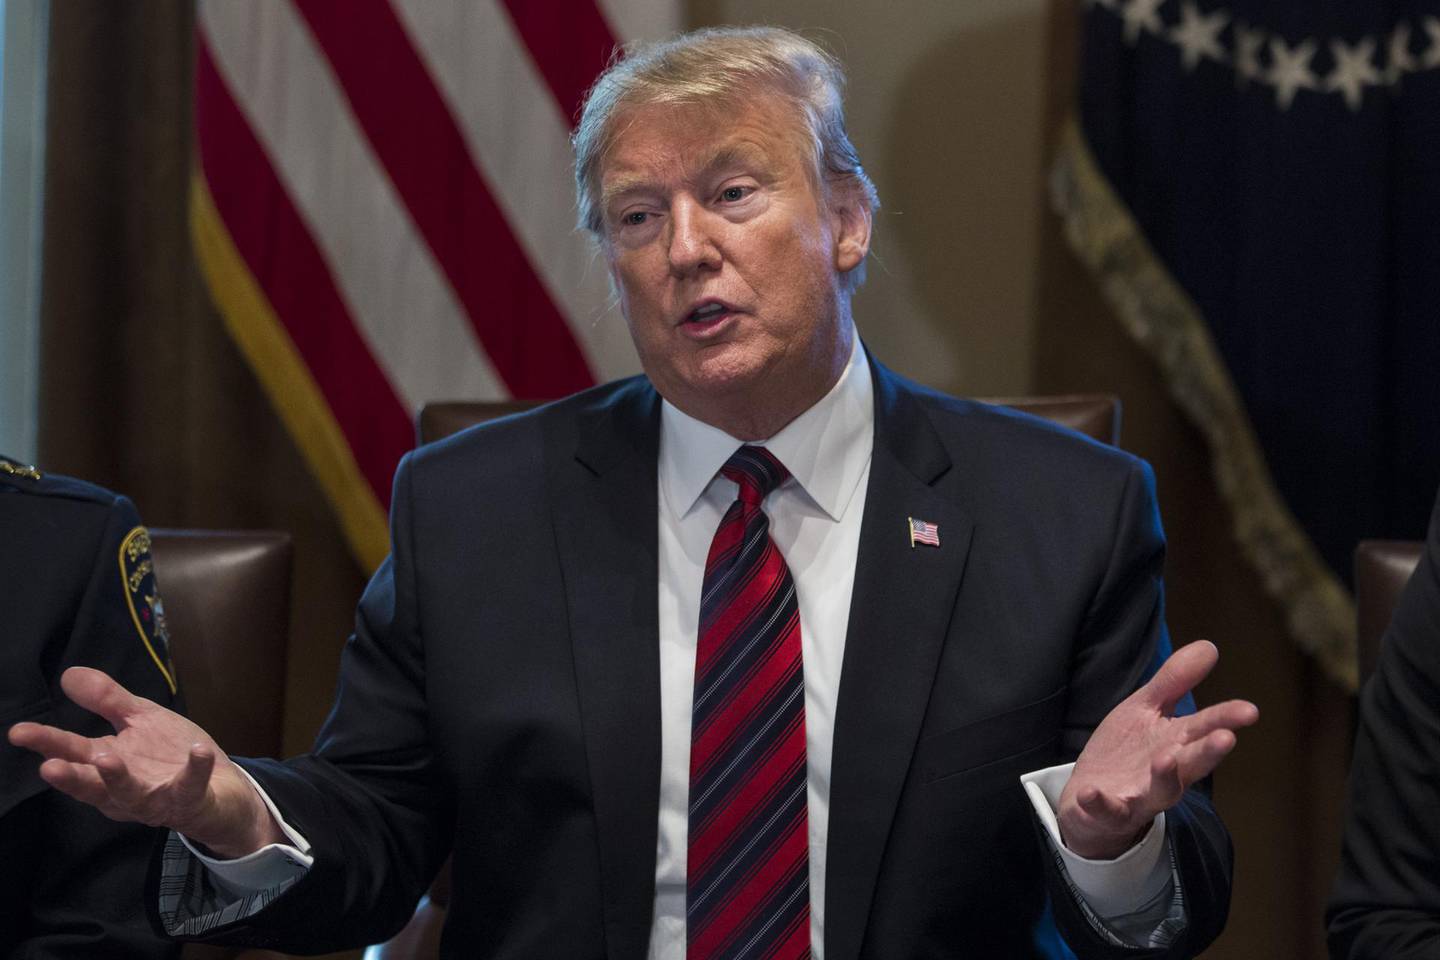 U.S. President Donald Trump speaks during a roundtable discussion on border security at the White House in Washington, D.C., U.S., on Friday, Jan. 11, 2019. The partial government shutdown stretched into its 21st day, tying the record for the longest. Judges, law enforcement officers, NASA engineers, weather forecasters and office staff were among some 800,000 federal workers who missed their first paychecks on Friday. Photographer: Zach Gibson/Bloomberg